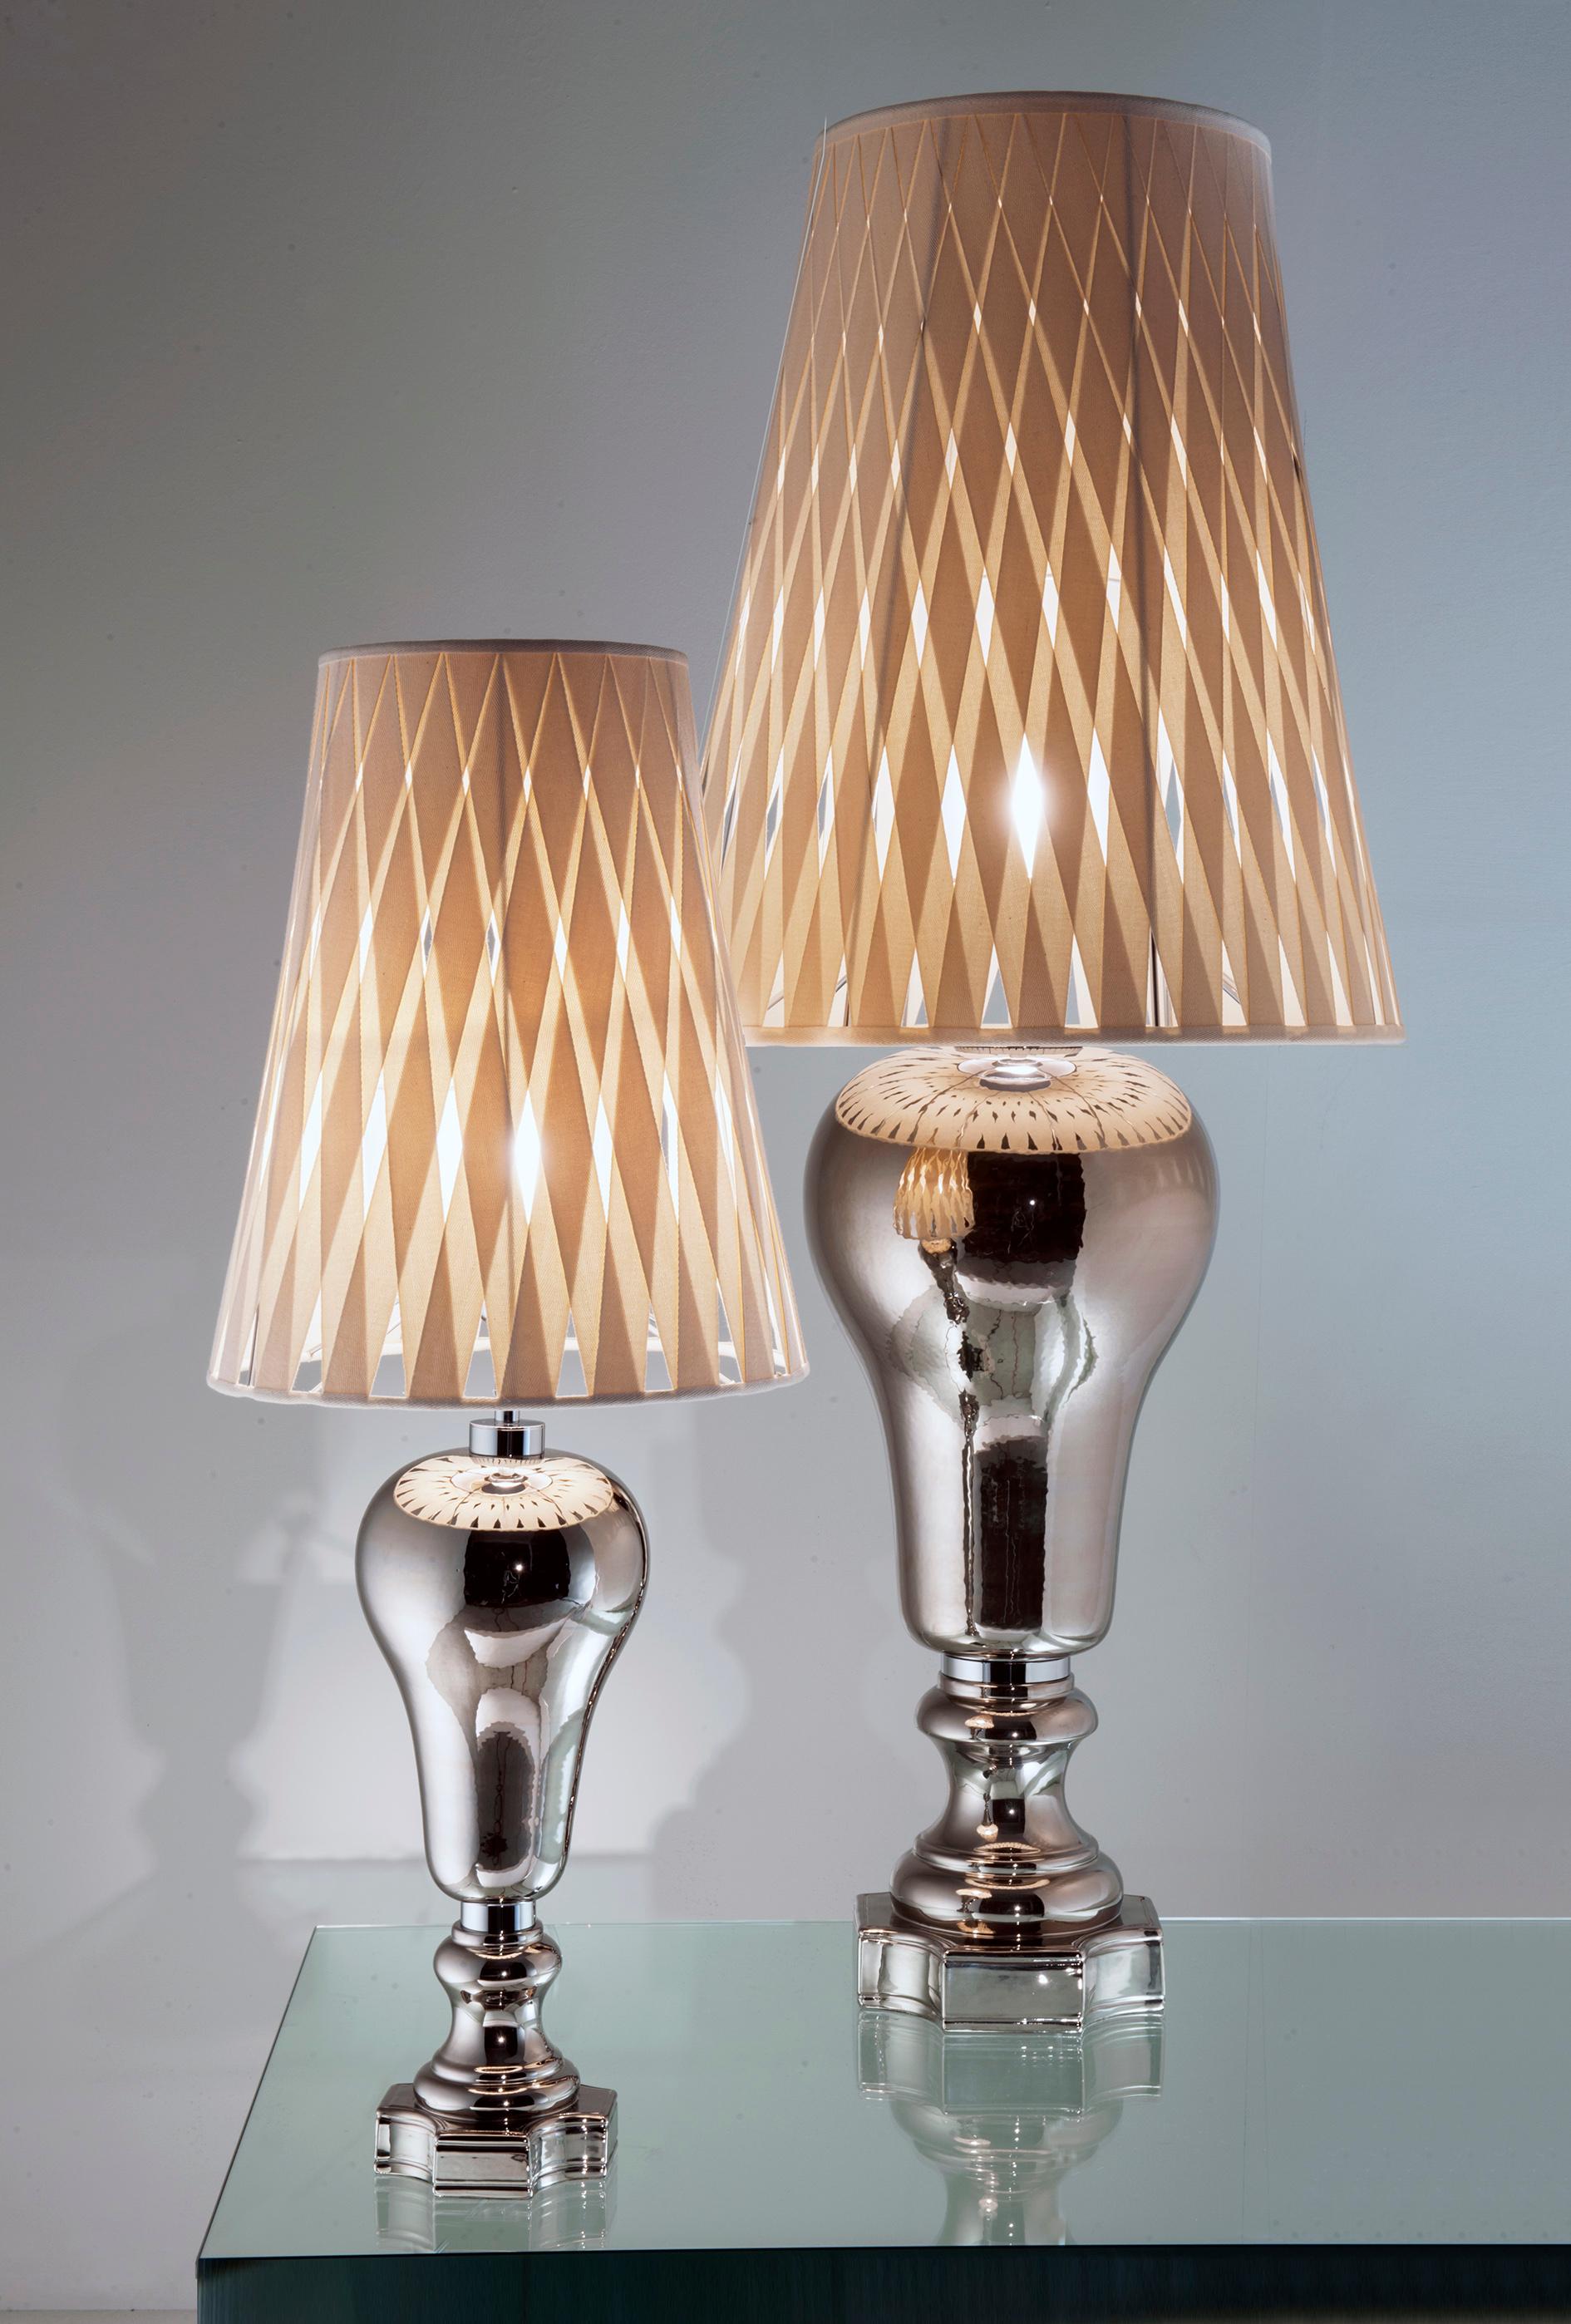 Italian 21st Century Ginger and Fred Platinum Ceramic Table Lamp by Patrizia Garganti For Sale